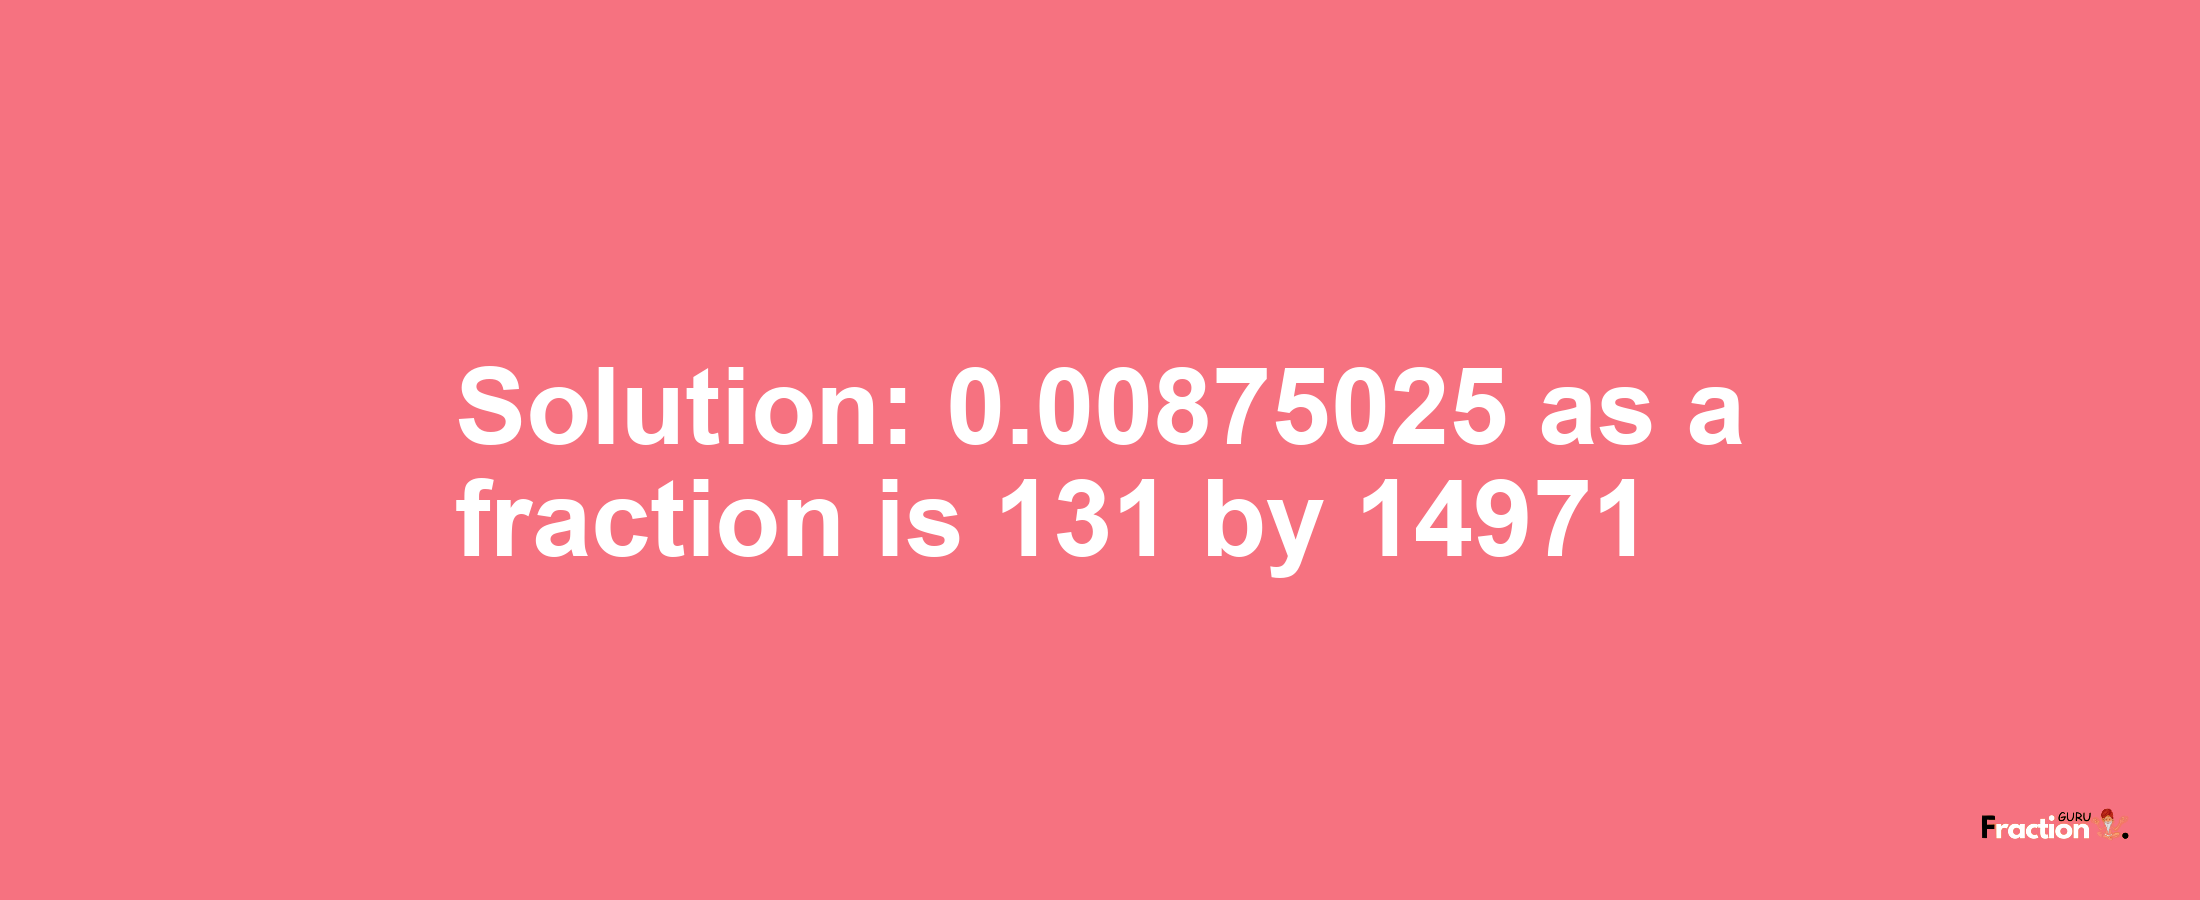 Solution:0.00875025 as a fraction is 131/14971